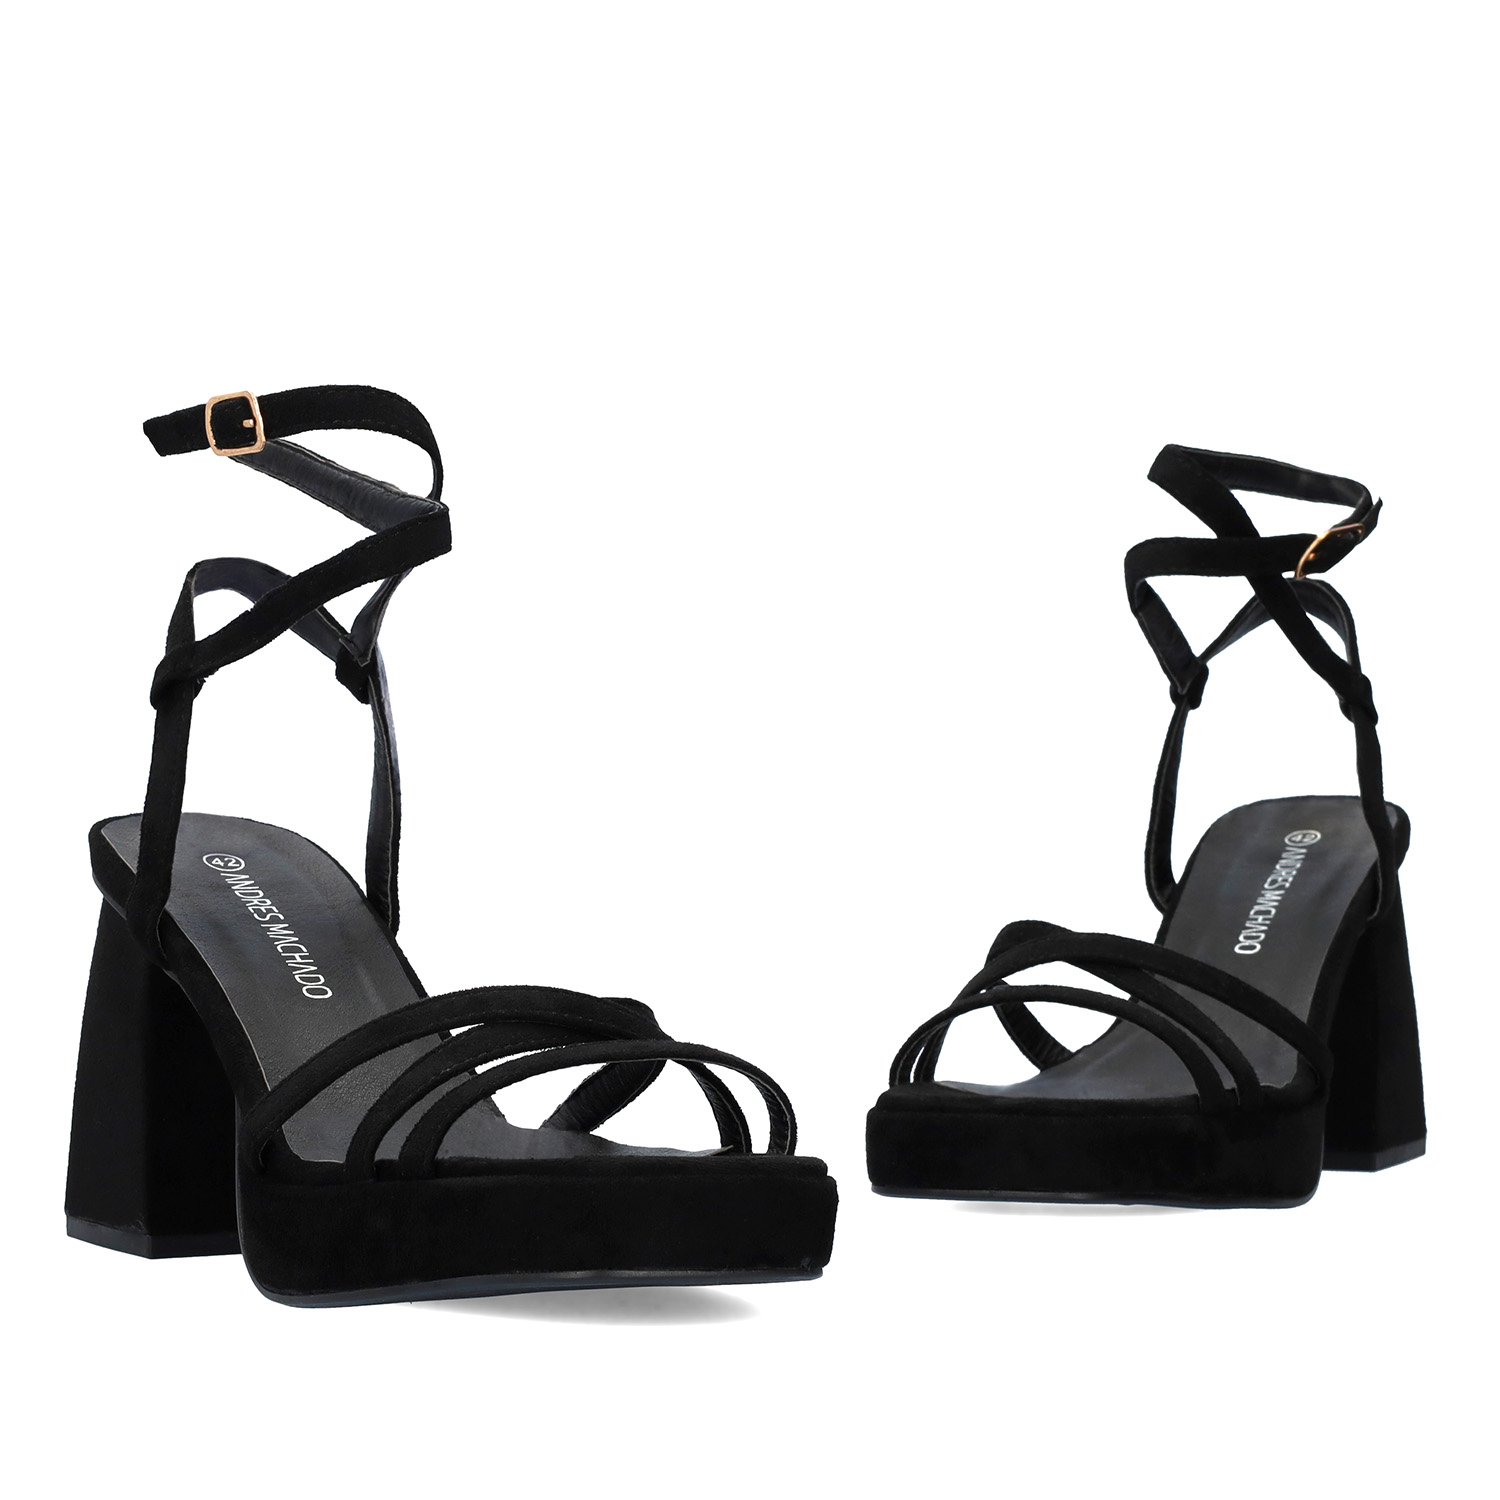 Black faux suede sandal with squared heel 